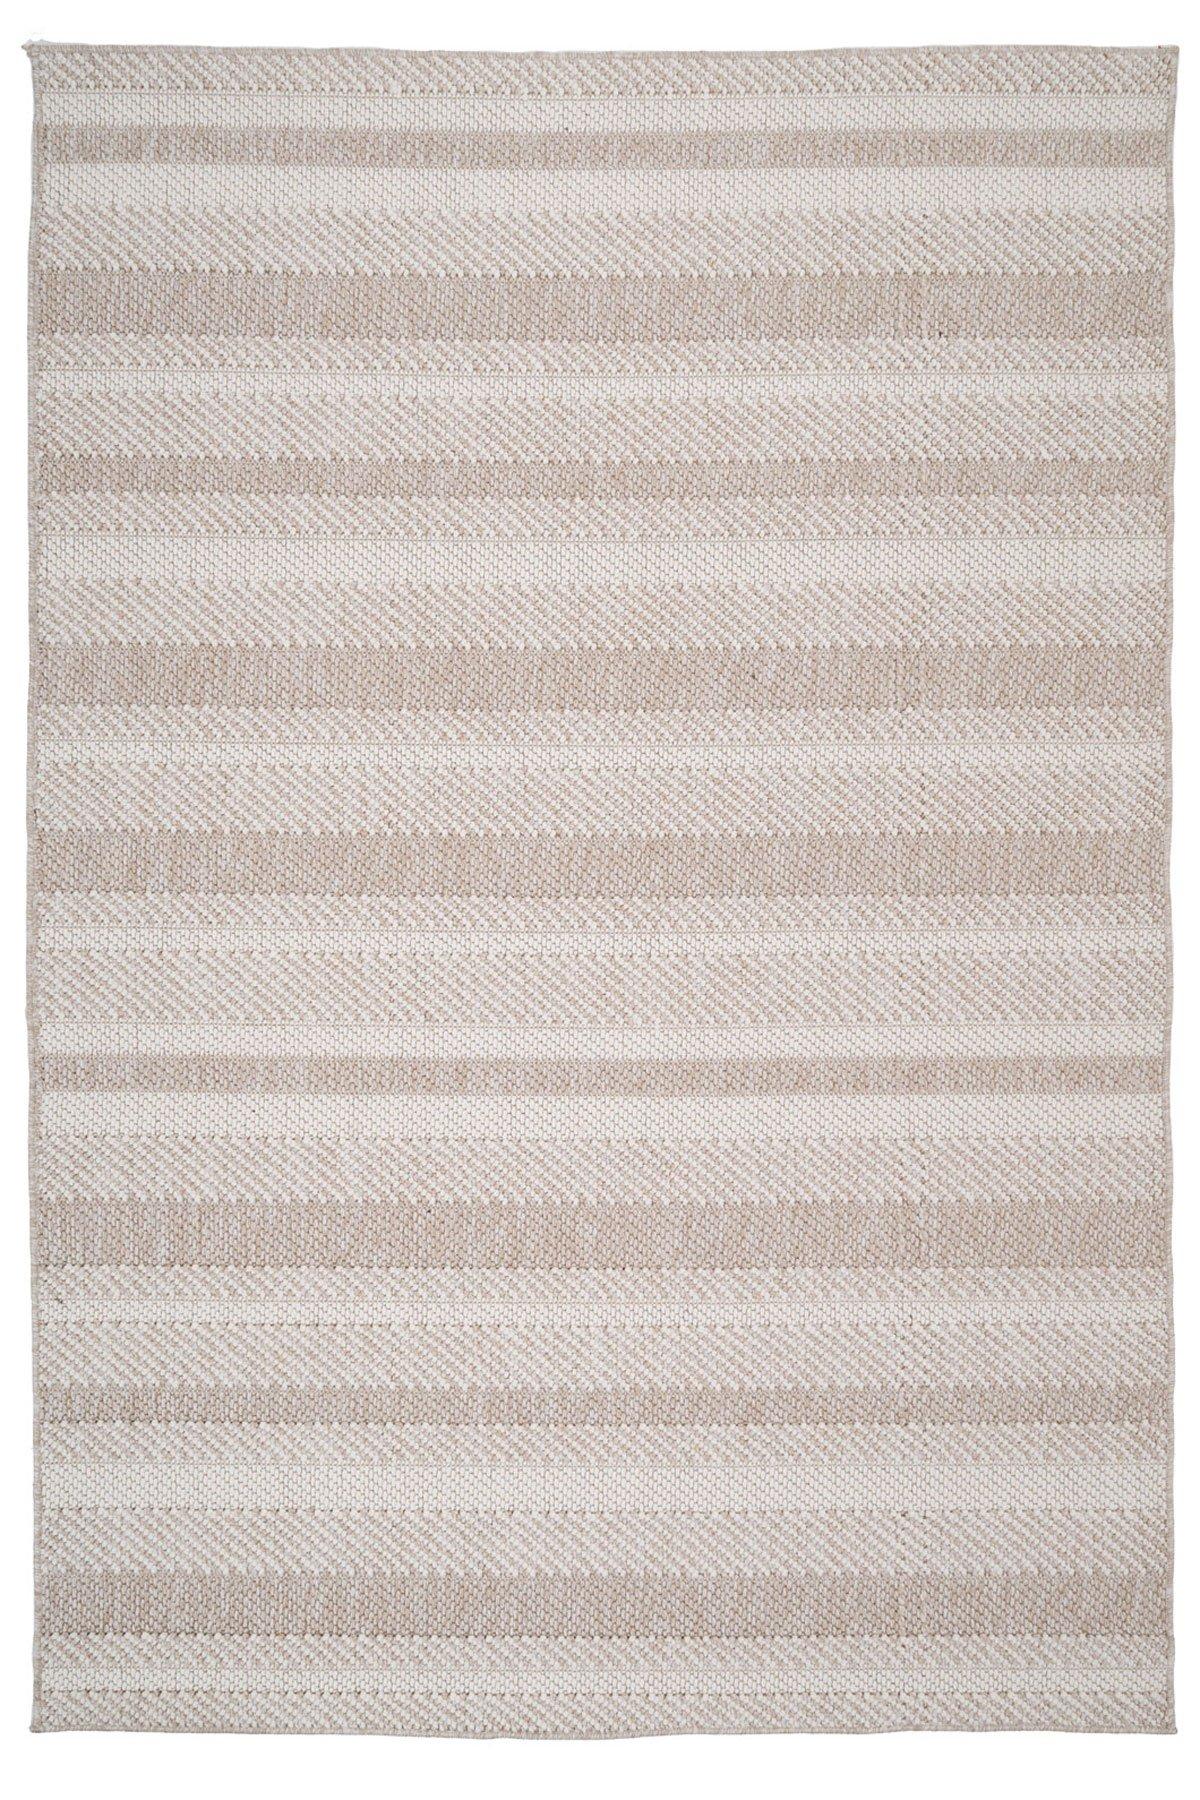 Natural Beige Stripped Area Rug Textured Looped Pile